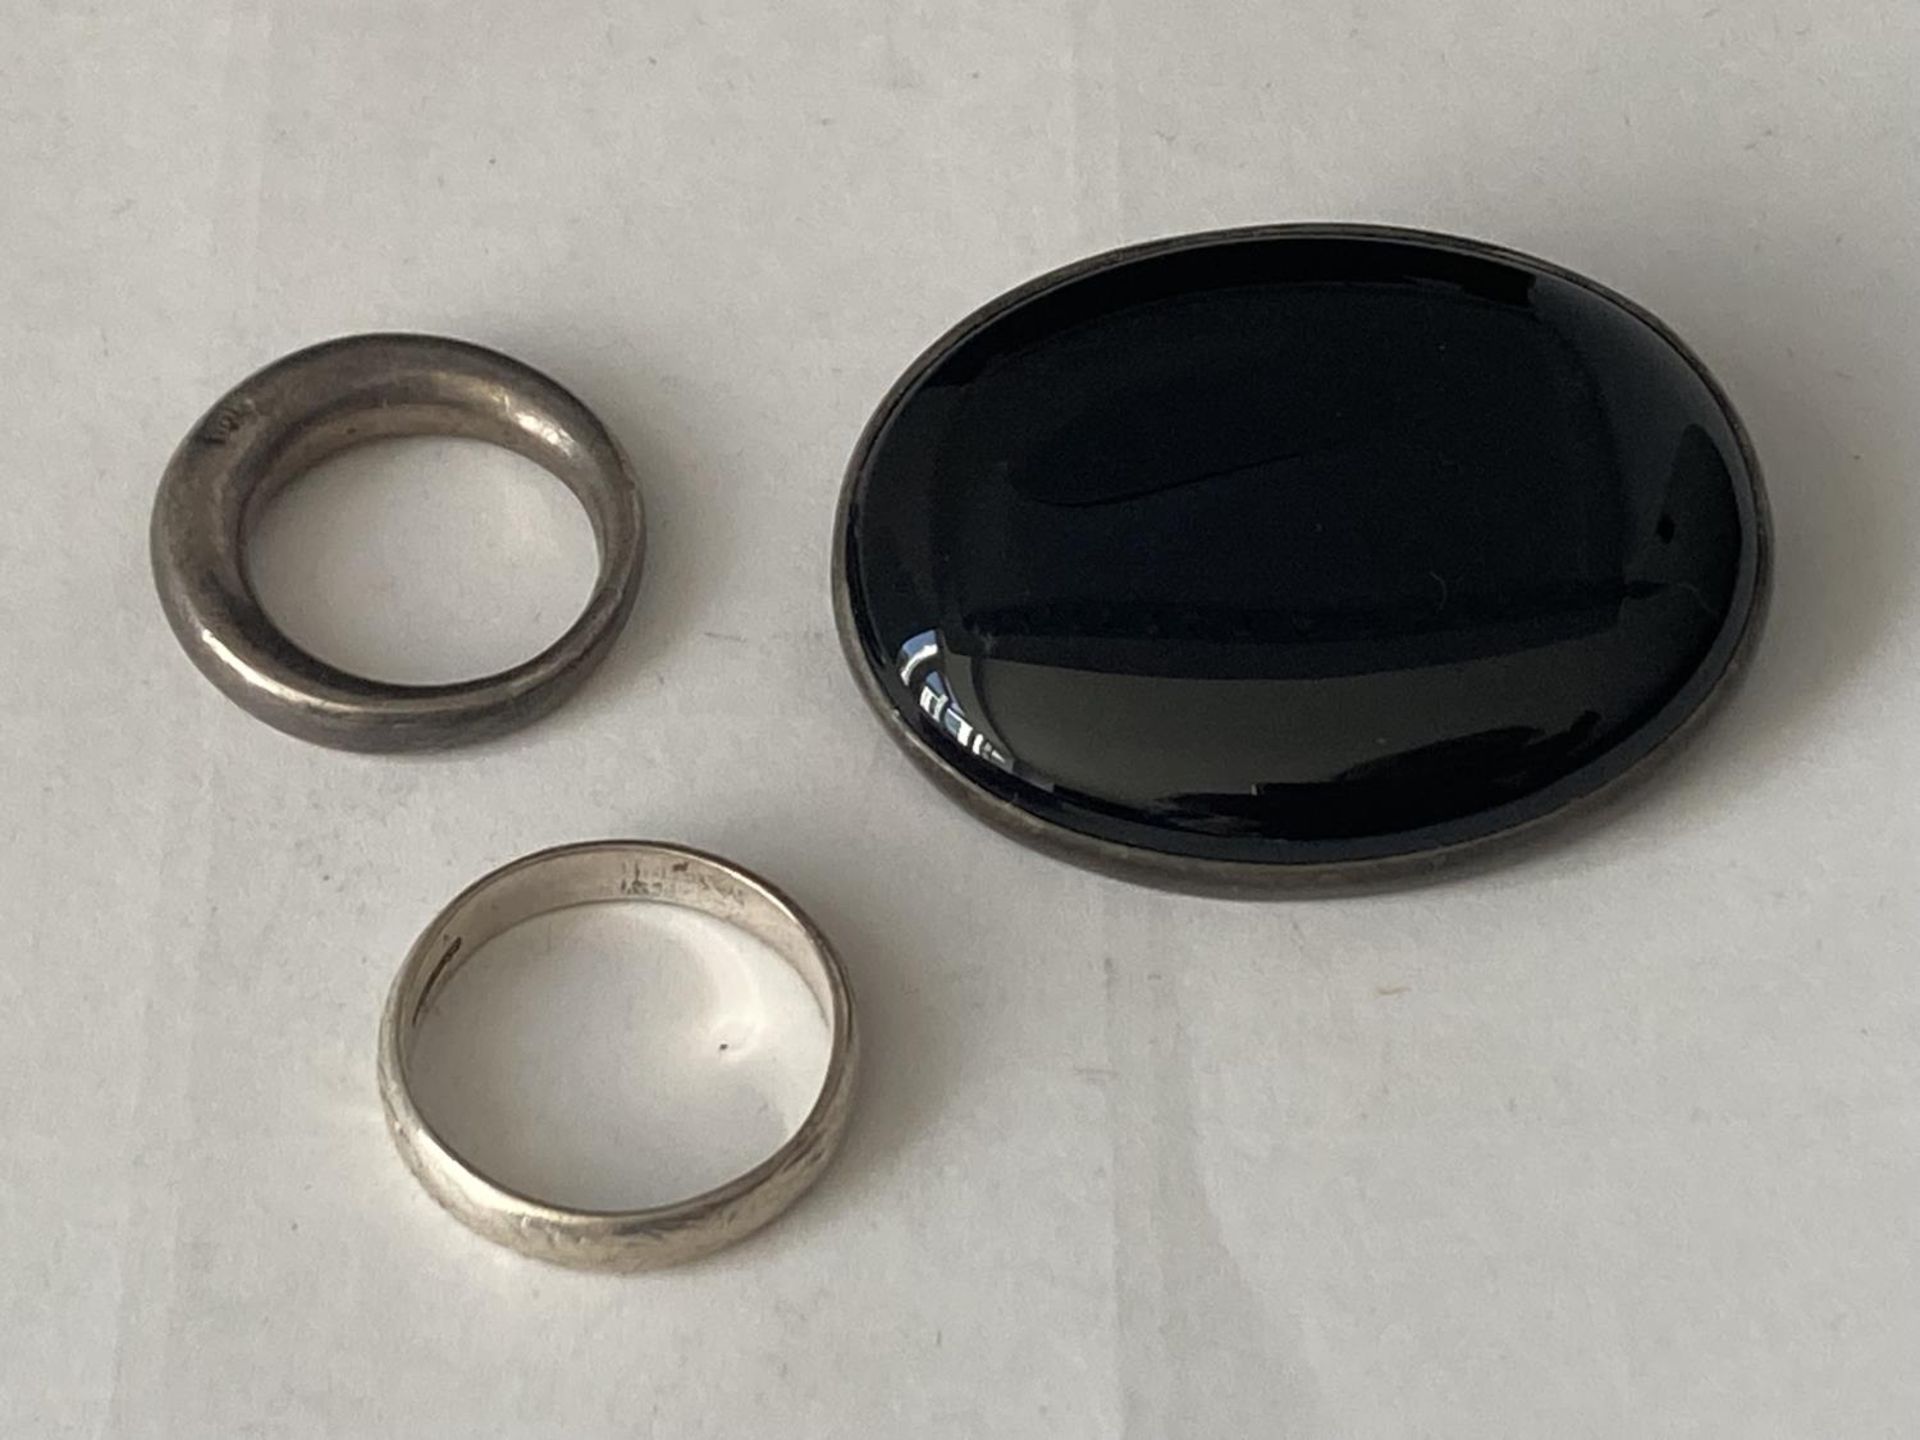 THREE SILVER ITEMS TO INCLUDE TWO RINGS AND A VINTAGE BLACK STONE BROOCH